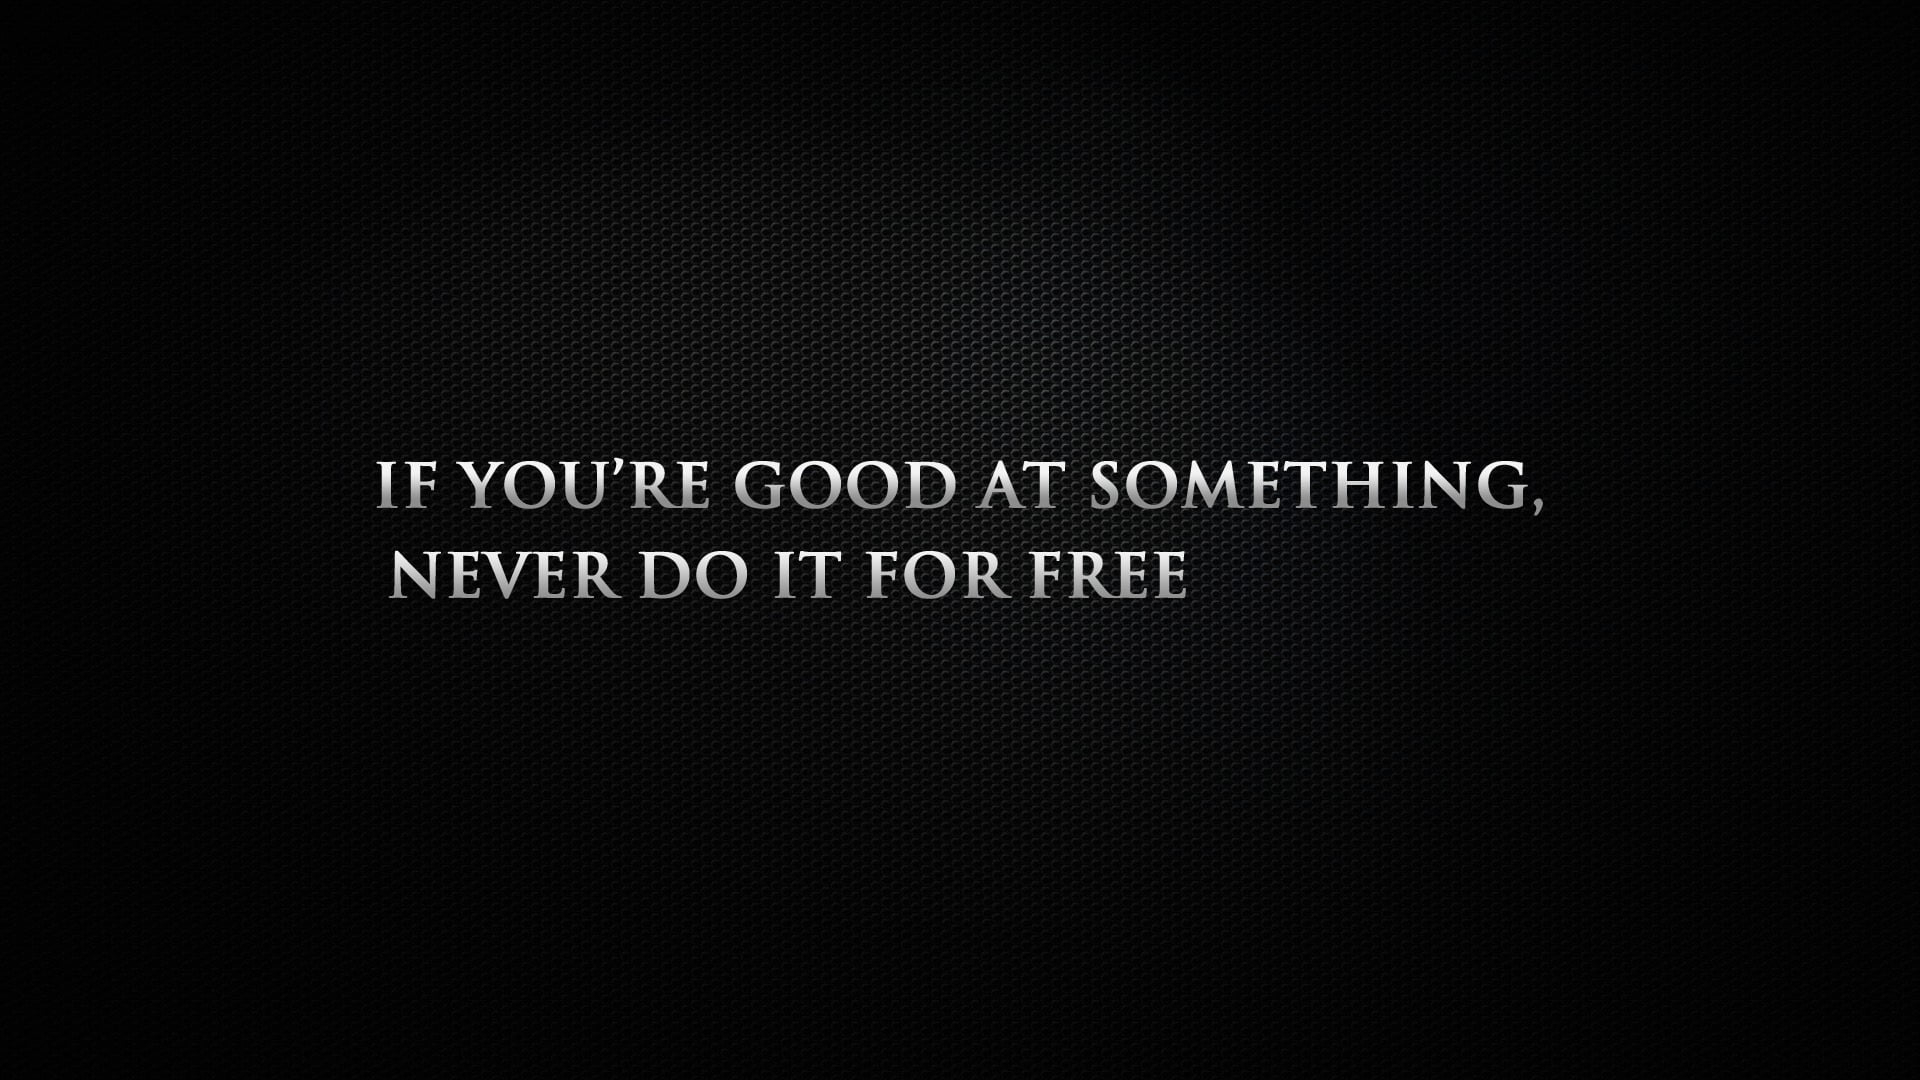 If you’re good at something never do it for free wallpaper, digital art, quote, communication